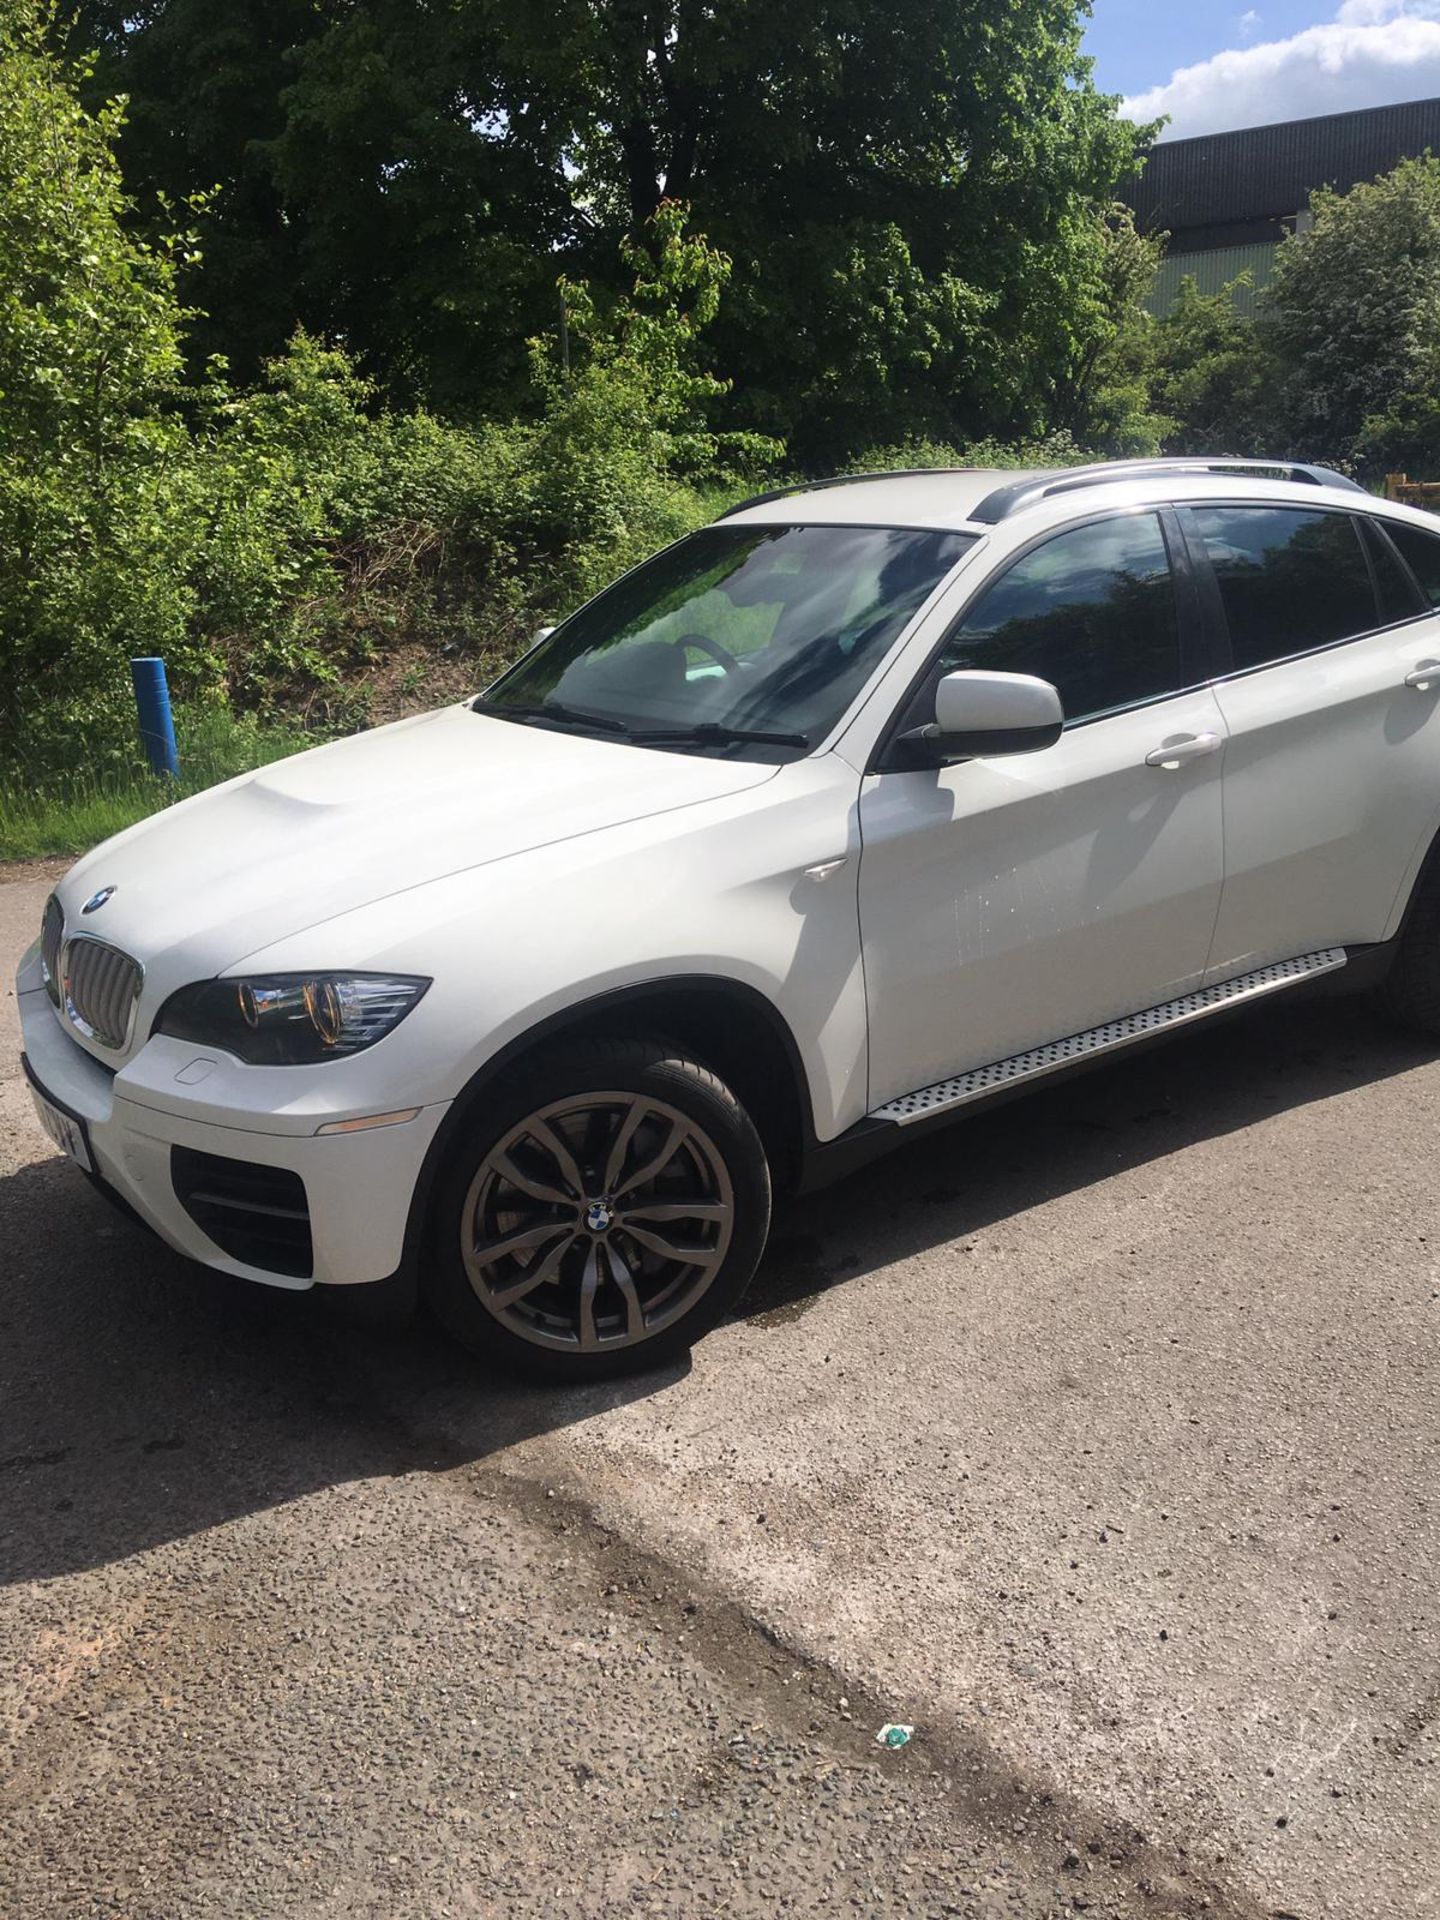 2013/13 REG BMW X6 M50D AUTOMATIC 3.0 DIESEL WHITE, SHOWING 1 FORMER KEEPER *NO VAT* - Image 3 of 41